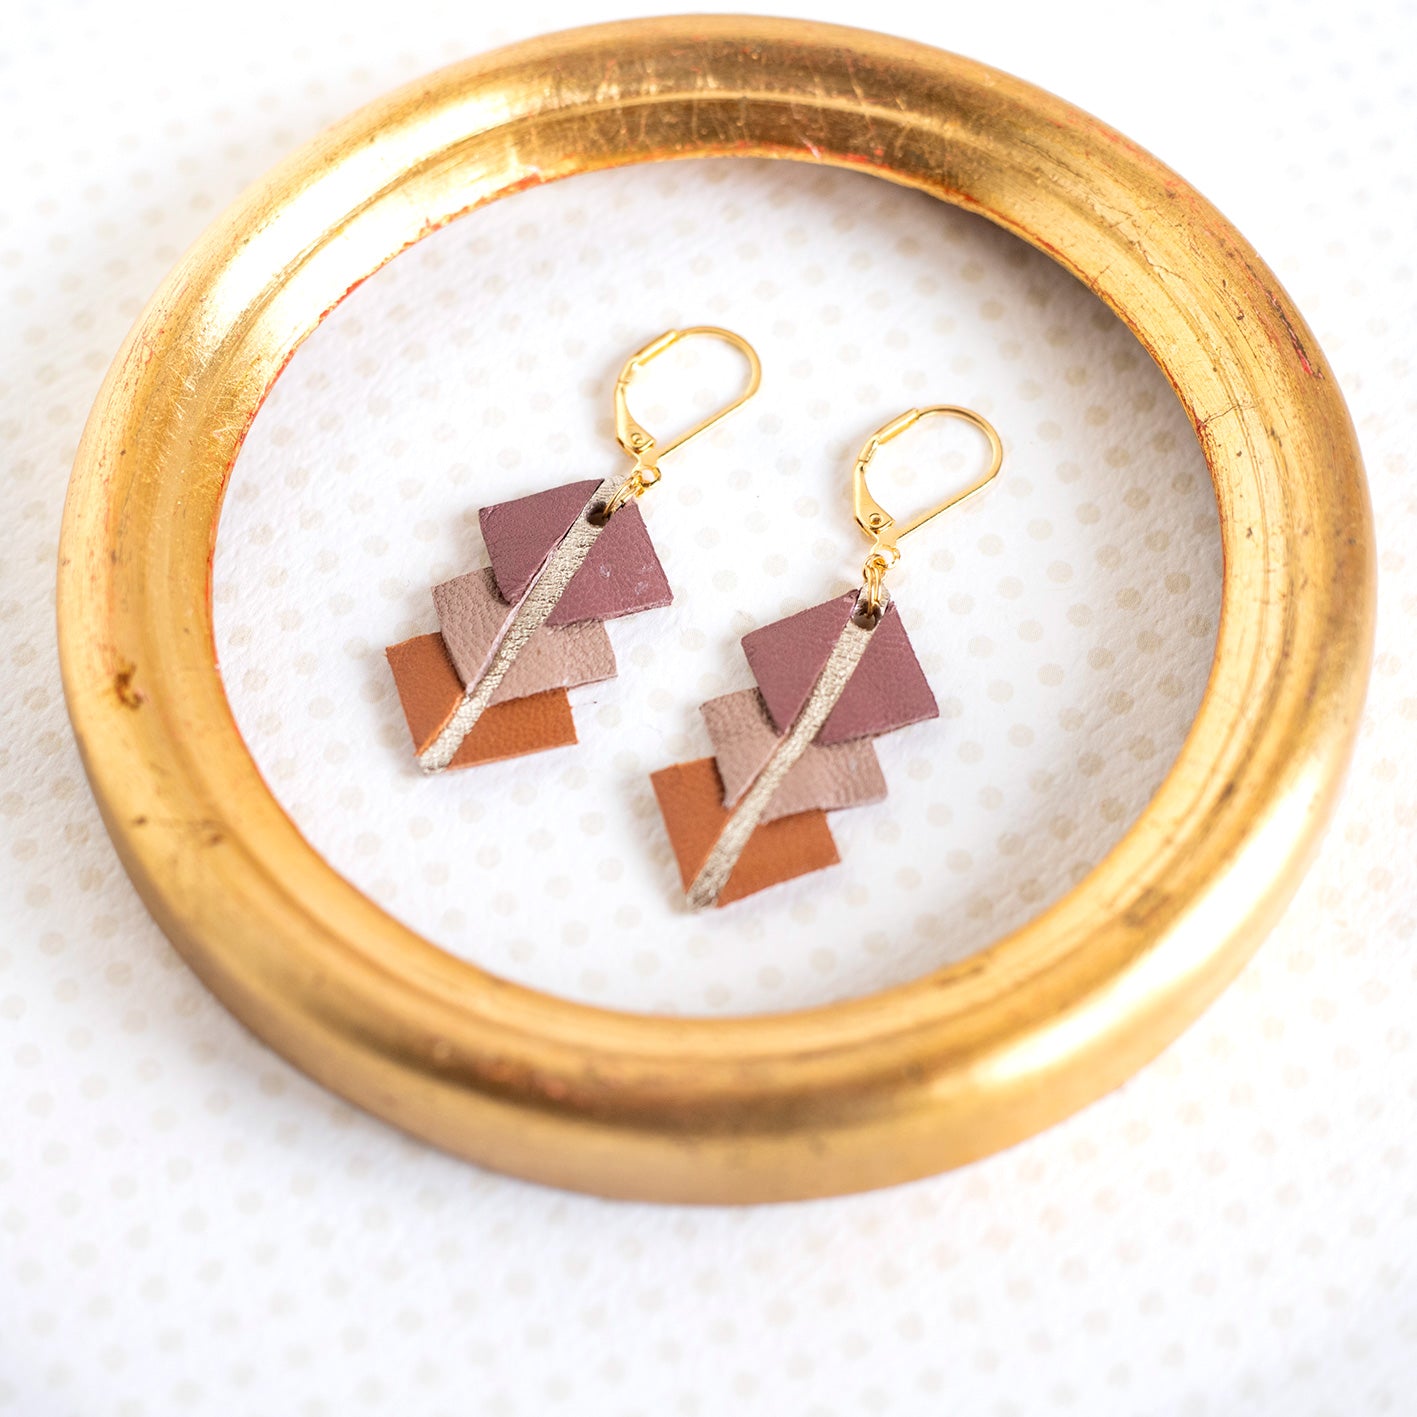 Azele earrings in grey-pink heather leather and saffron